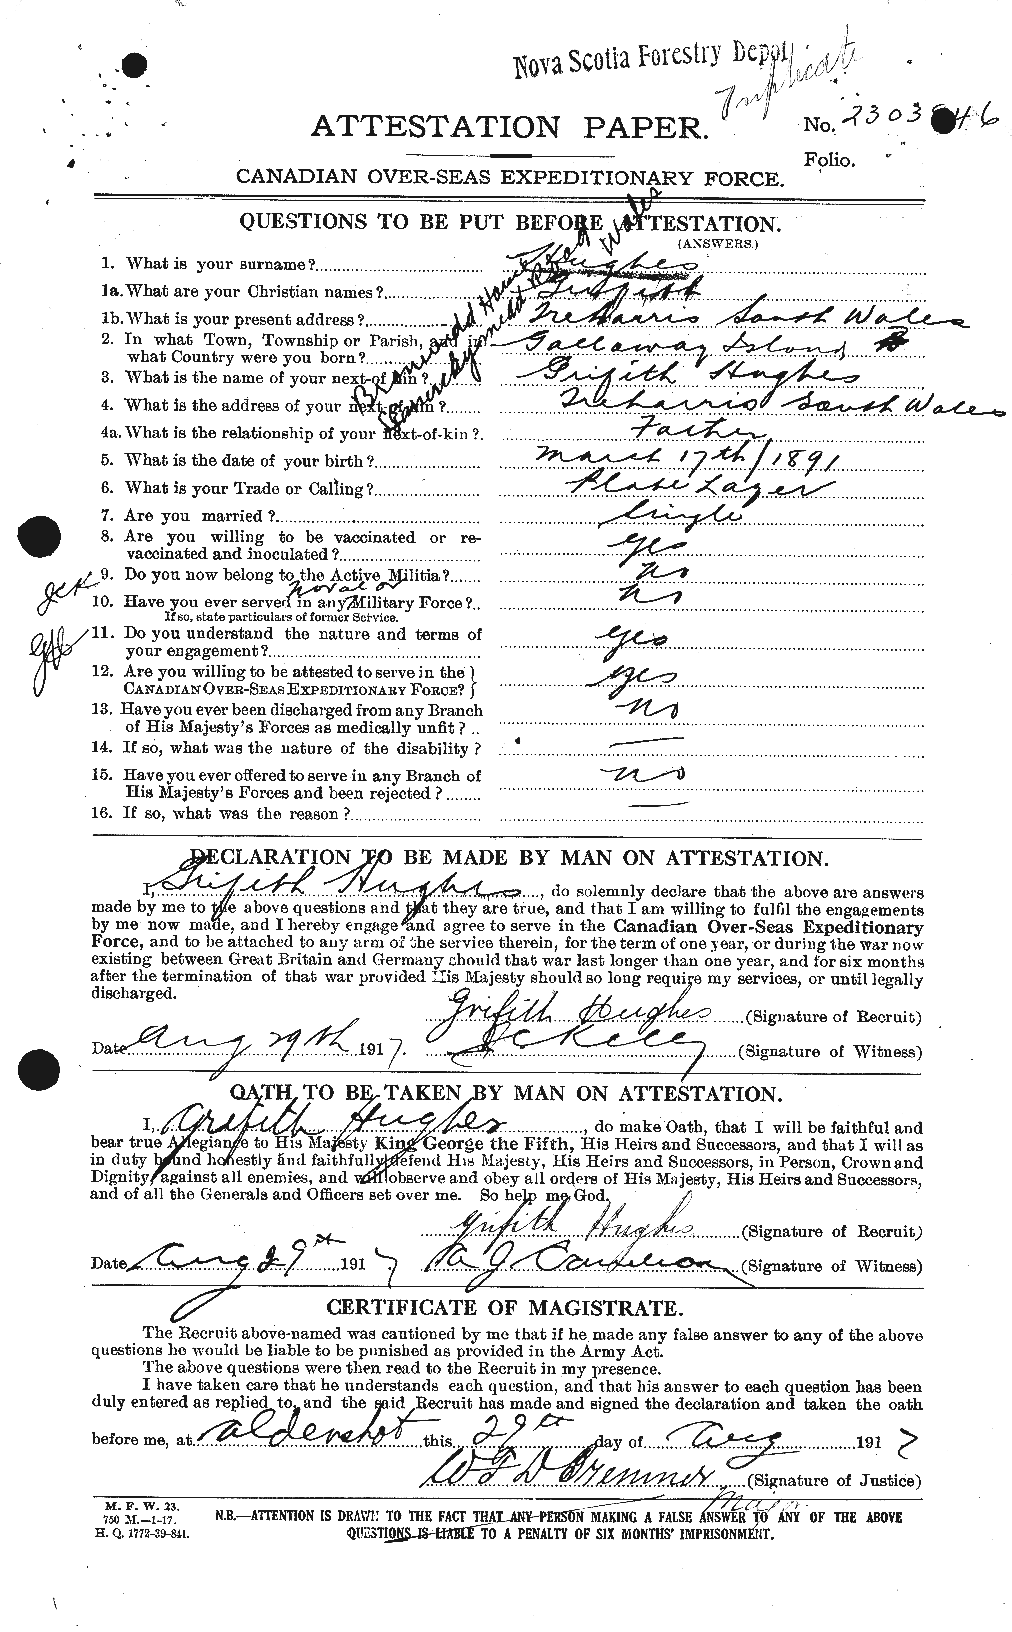 Personnel Records of the First World War - CEF 403851a